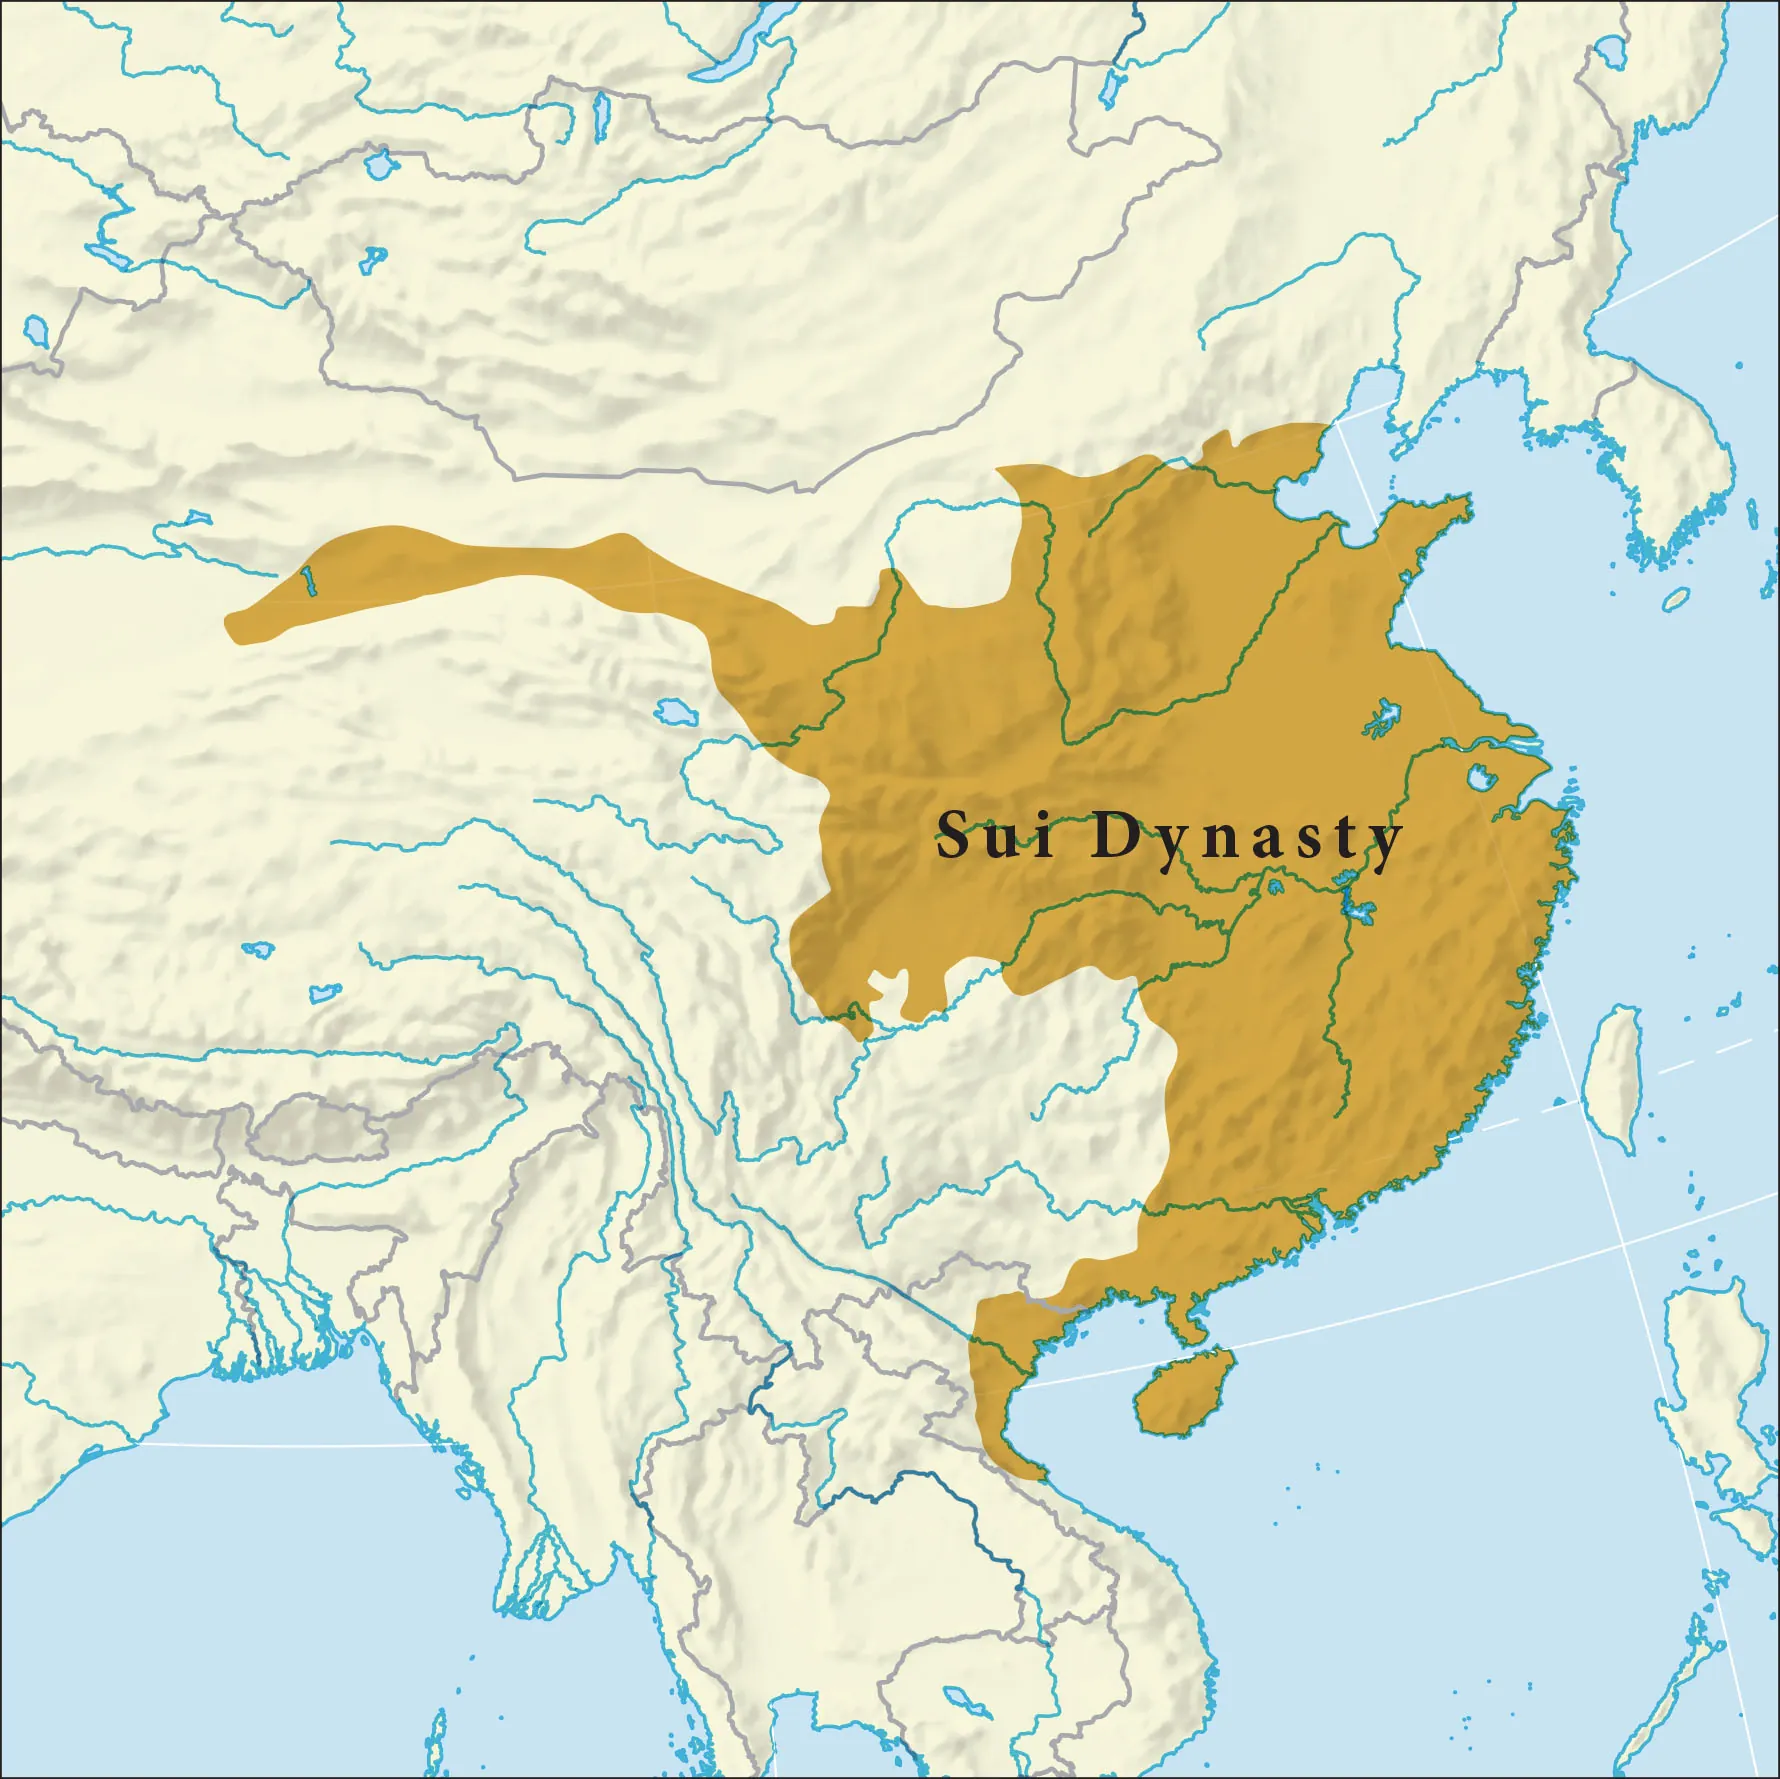 A map is shown. Land is shown in beige in the west and water is shown in blue in the east and southwest. A backward “C” shaped area with a long, thin portion sticking out toward the west is shown highlighted in gold on the east coast. It is labelled “Sui Dynasty.”